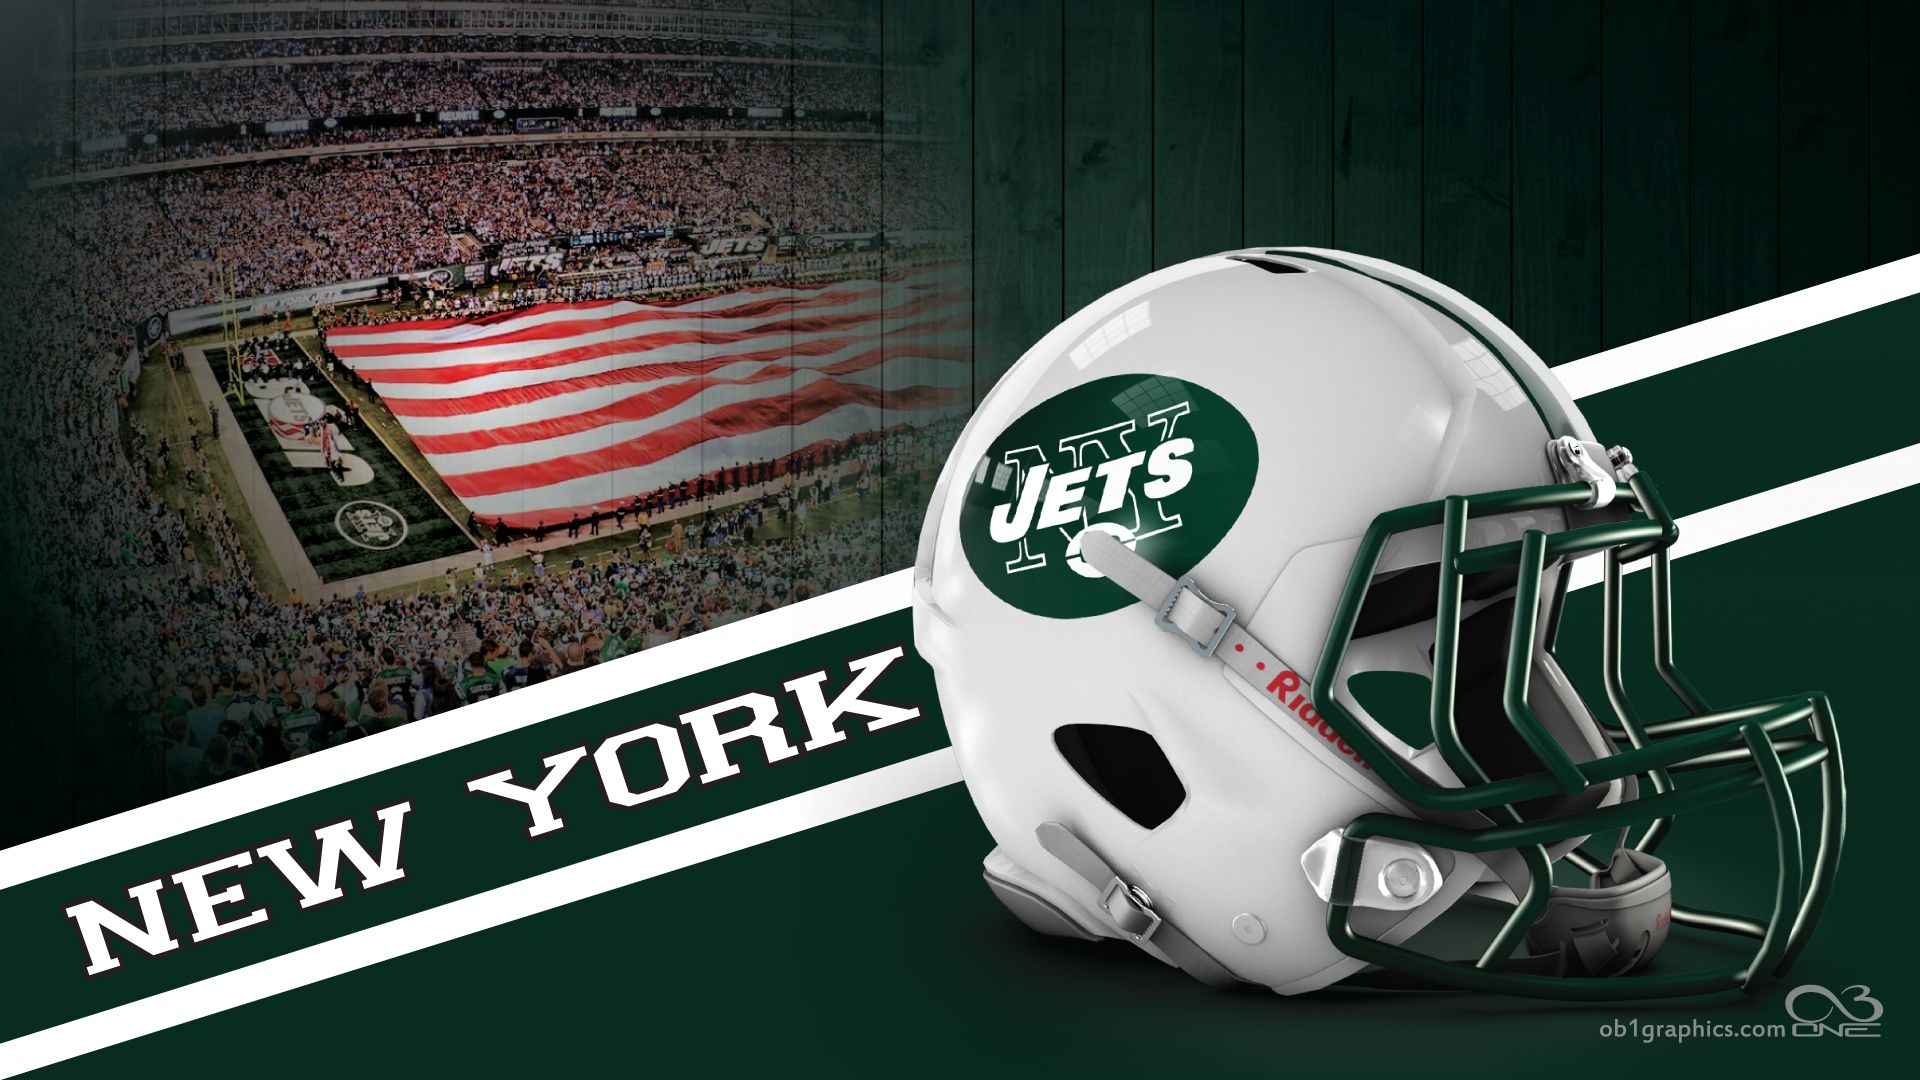 Wonderful New York Jets Wallpaper Full HD Pictures